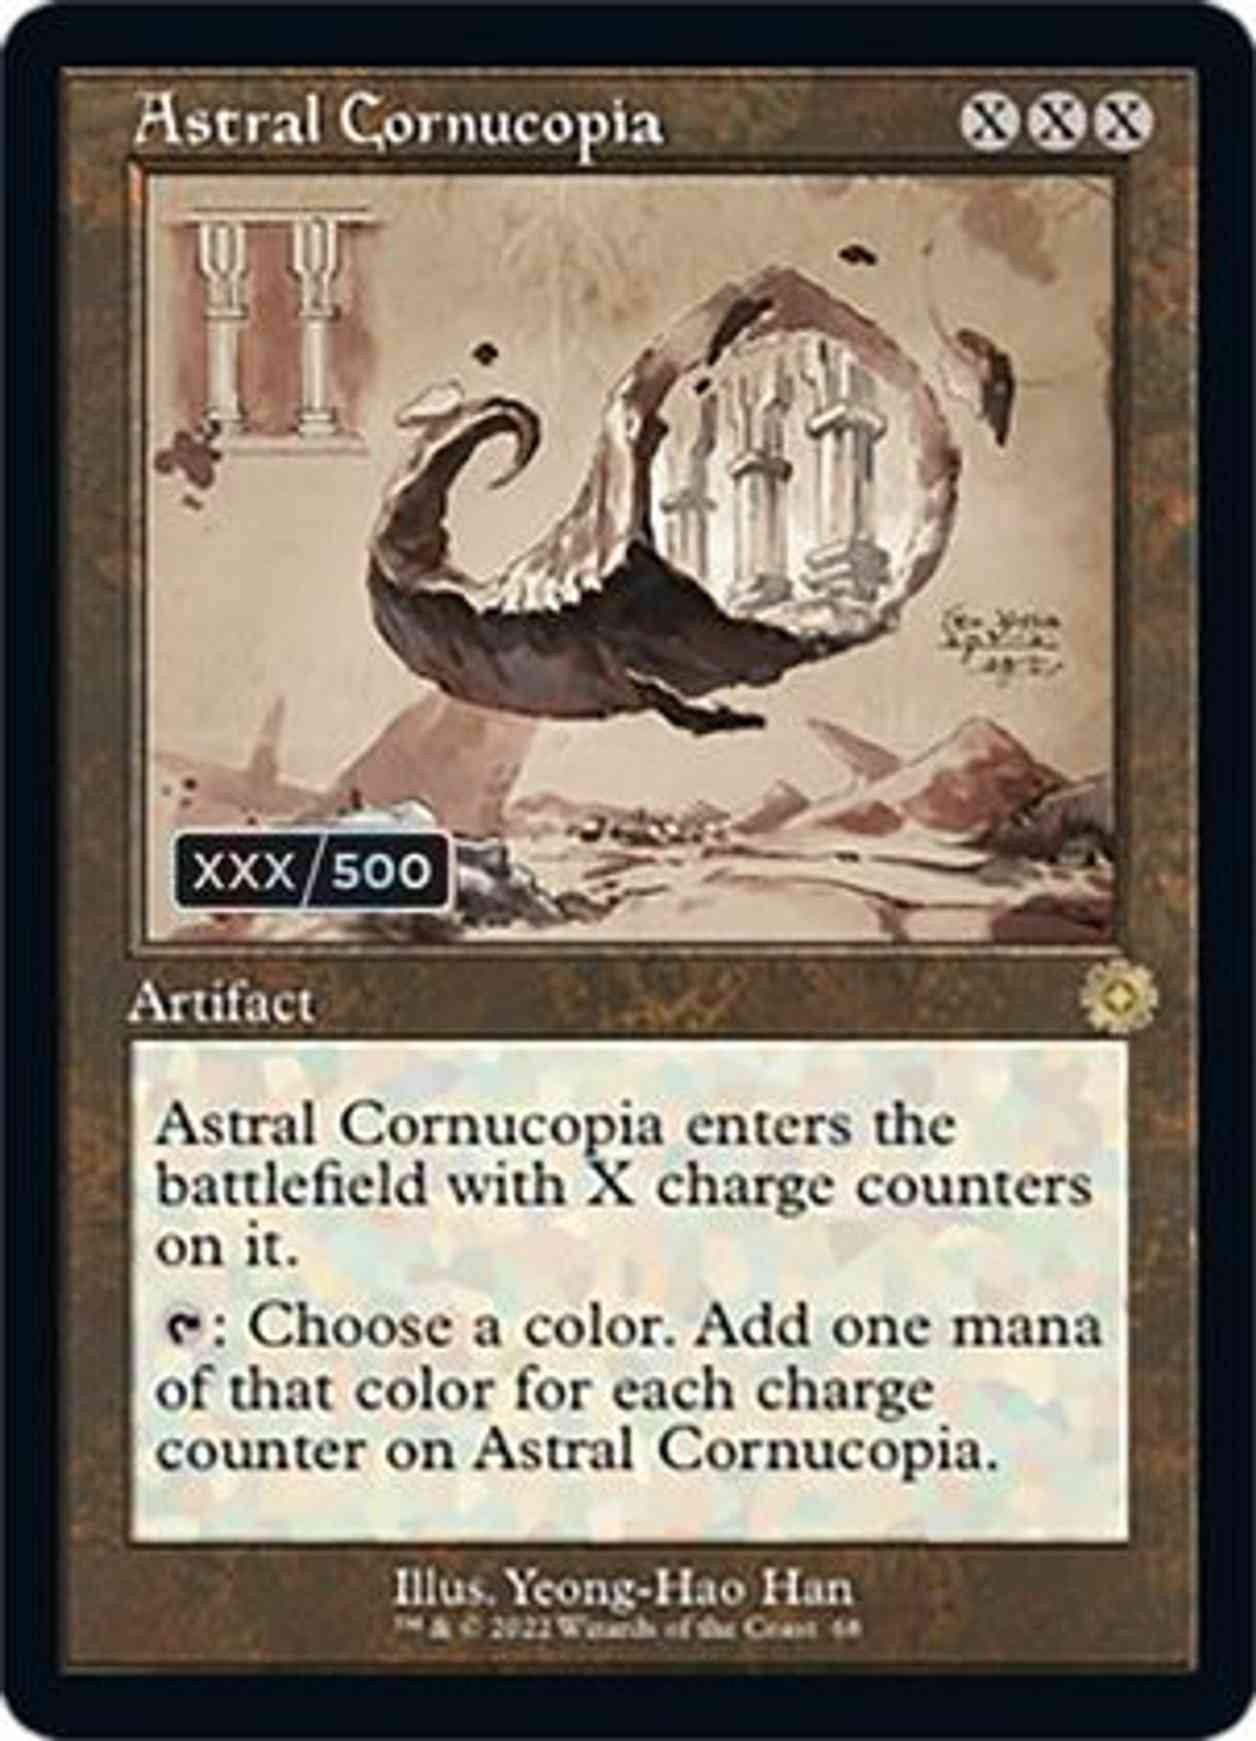 Astral Cornucopia (Schematic) (Serial Numbered) magic card front